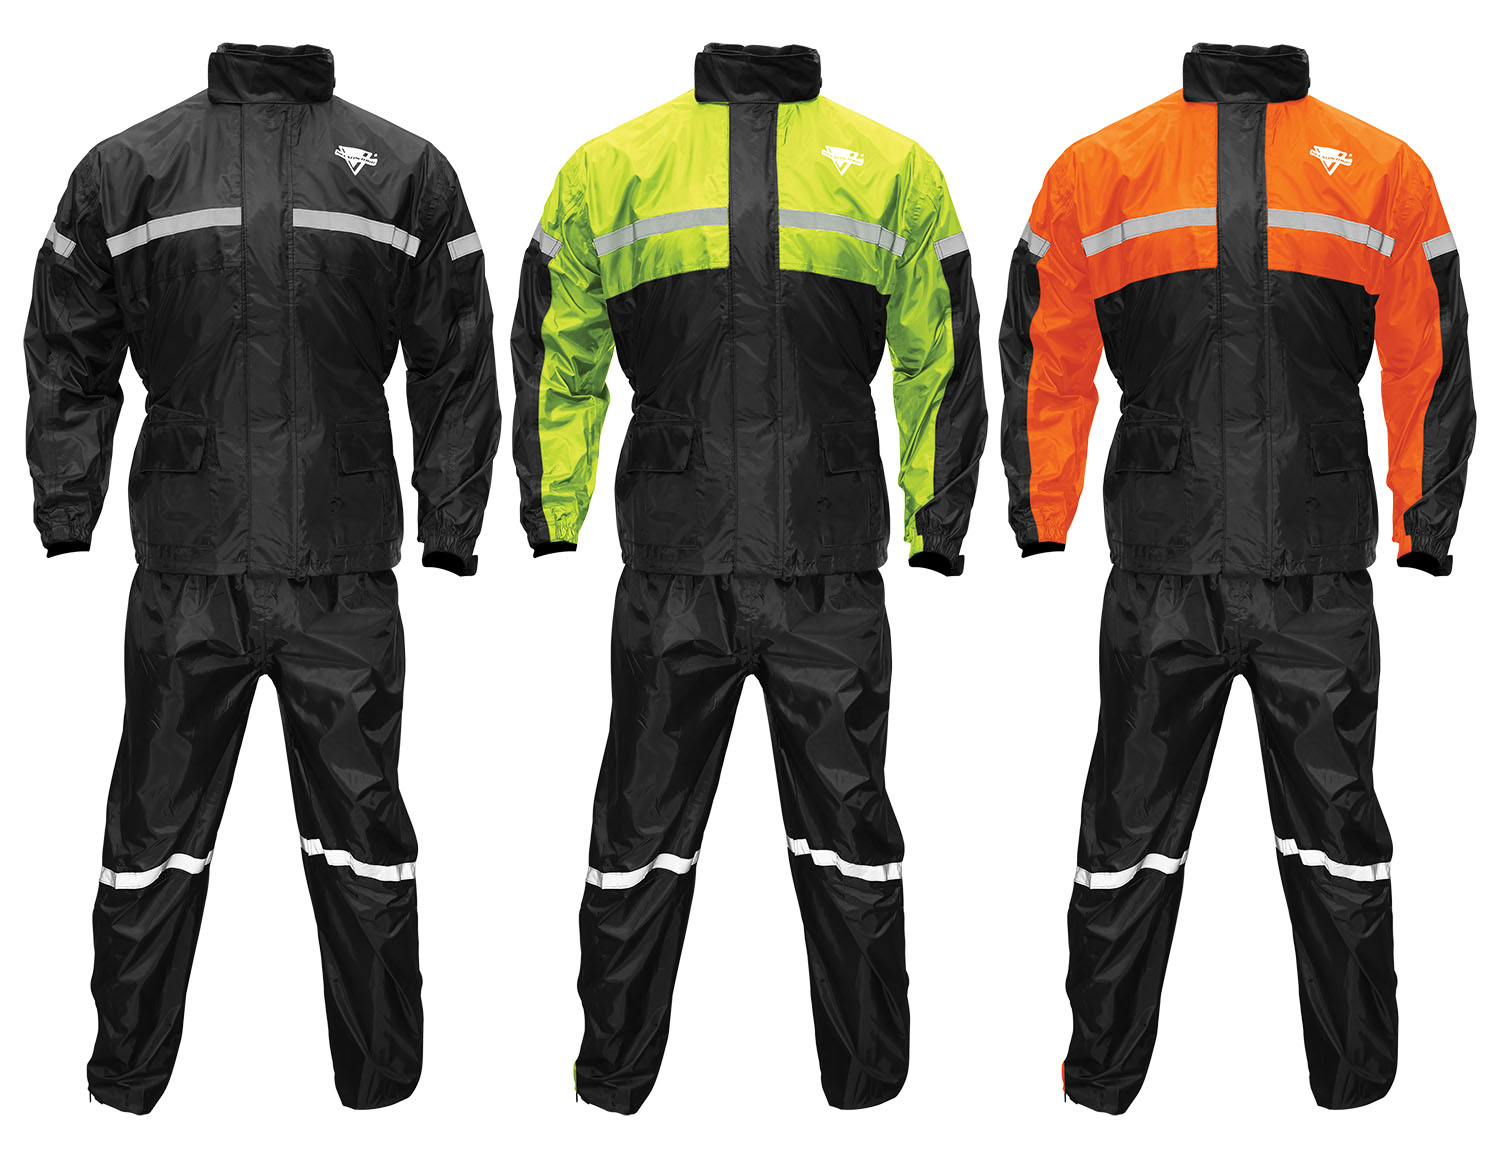 Photo showing StormRider rainsuit (Pants and jacket) in Black, Hi-Vis Yellow, and Orange on white background - front view